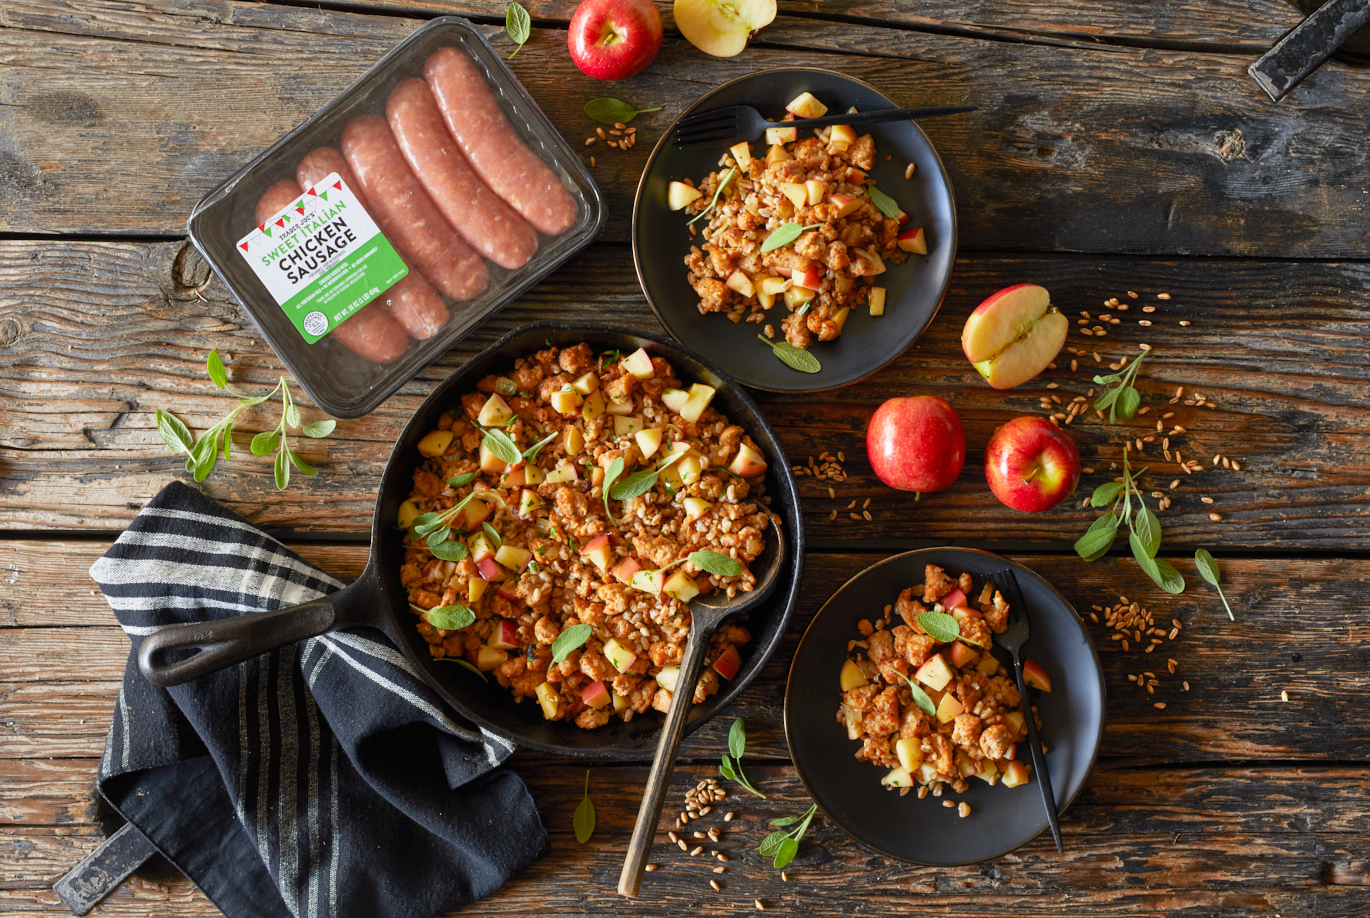 Trader Joe's Sweet Italian Chicken Sausage used in recipe for Farro with Chicken Sausage; served in a cast iron skillet and two plates, dried farro, apples and sage leaves on surface